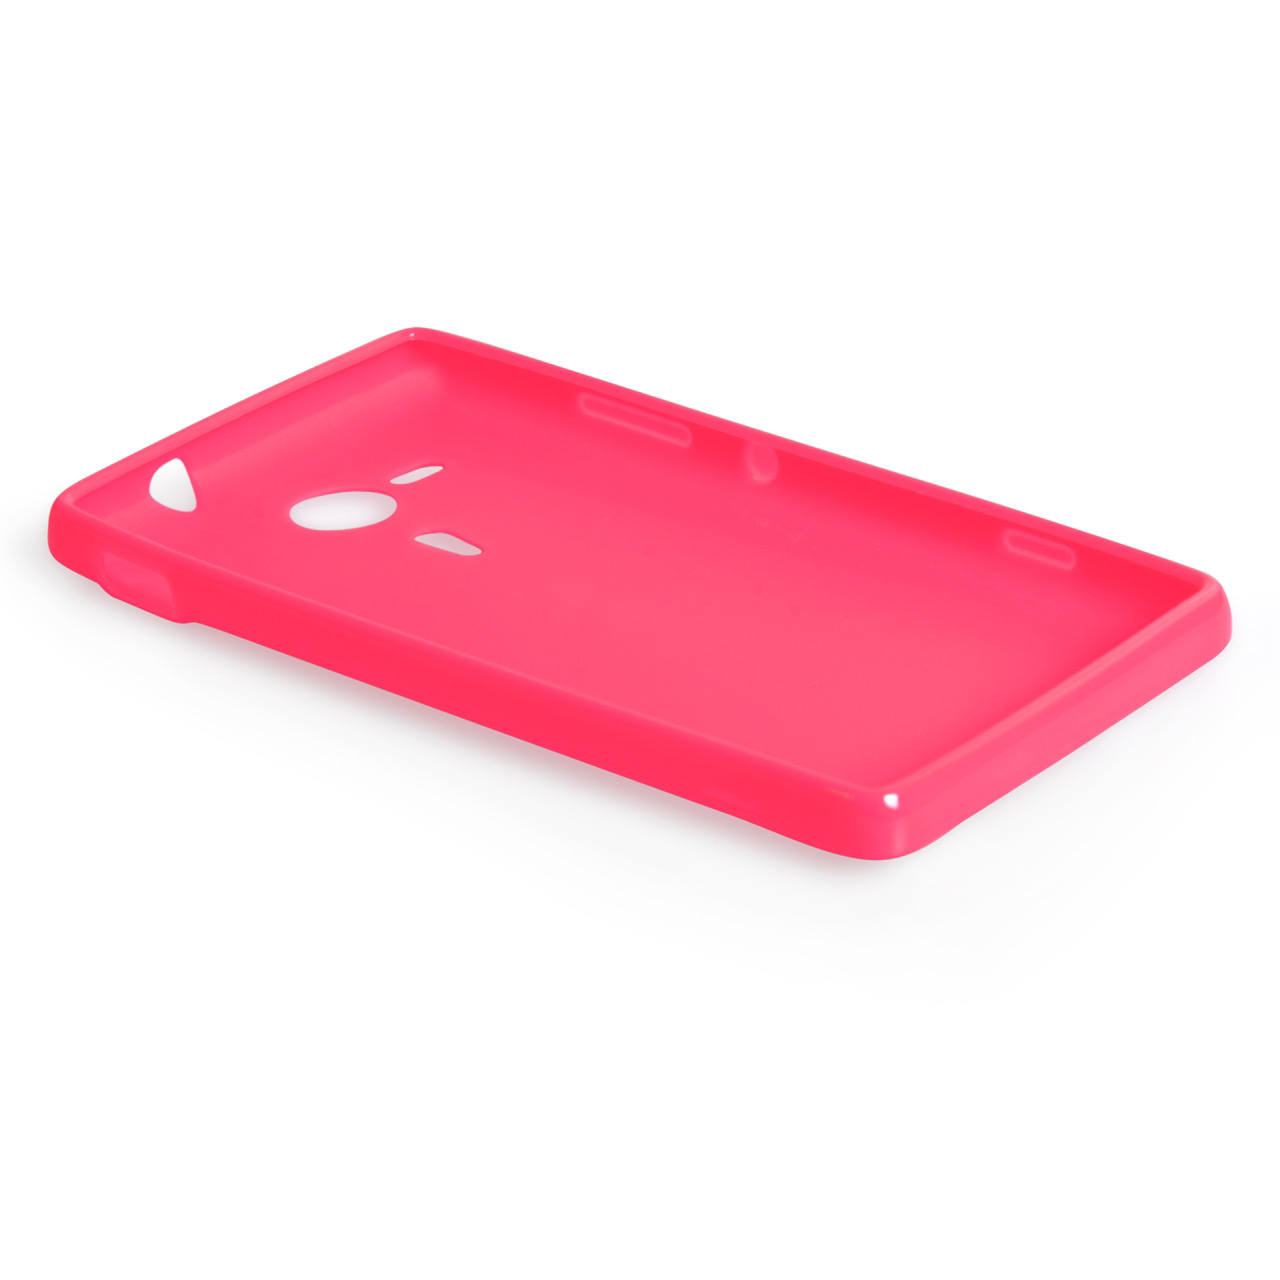 YouSave Accessories Sony Xperia SP Silicone Gel Case - Pink